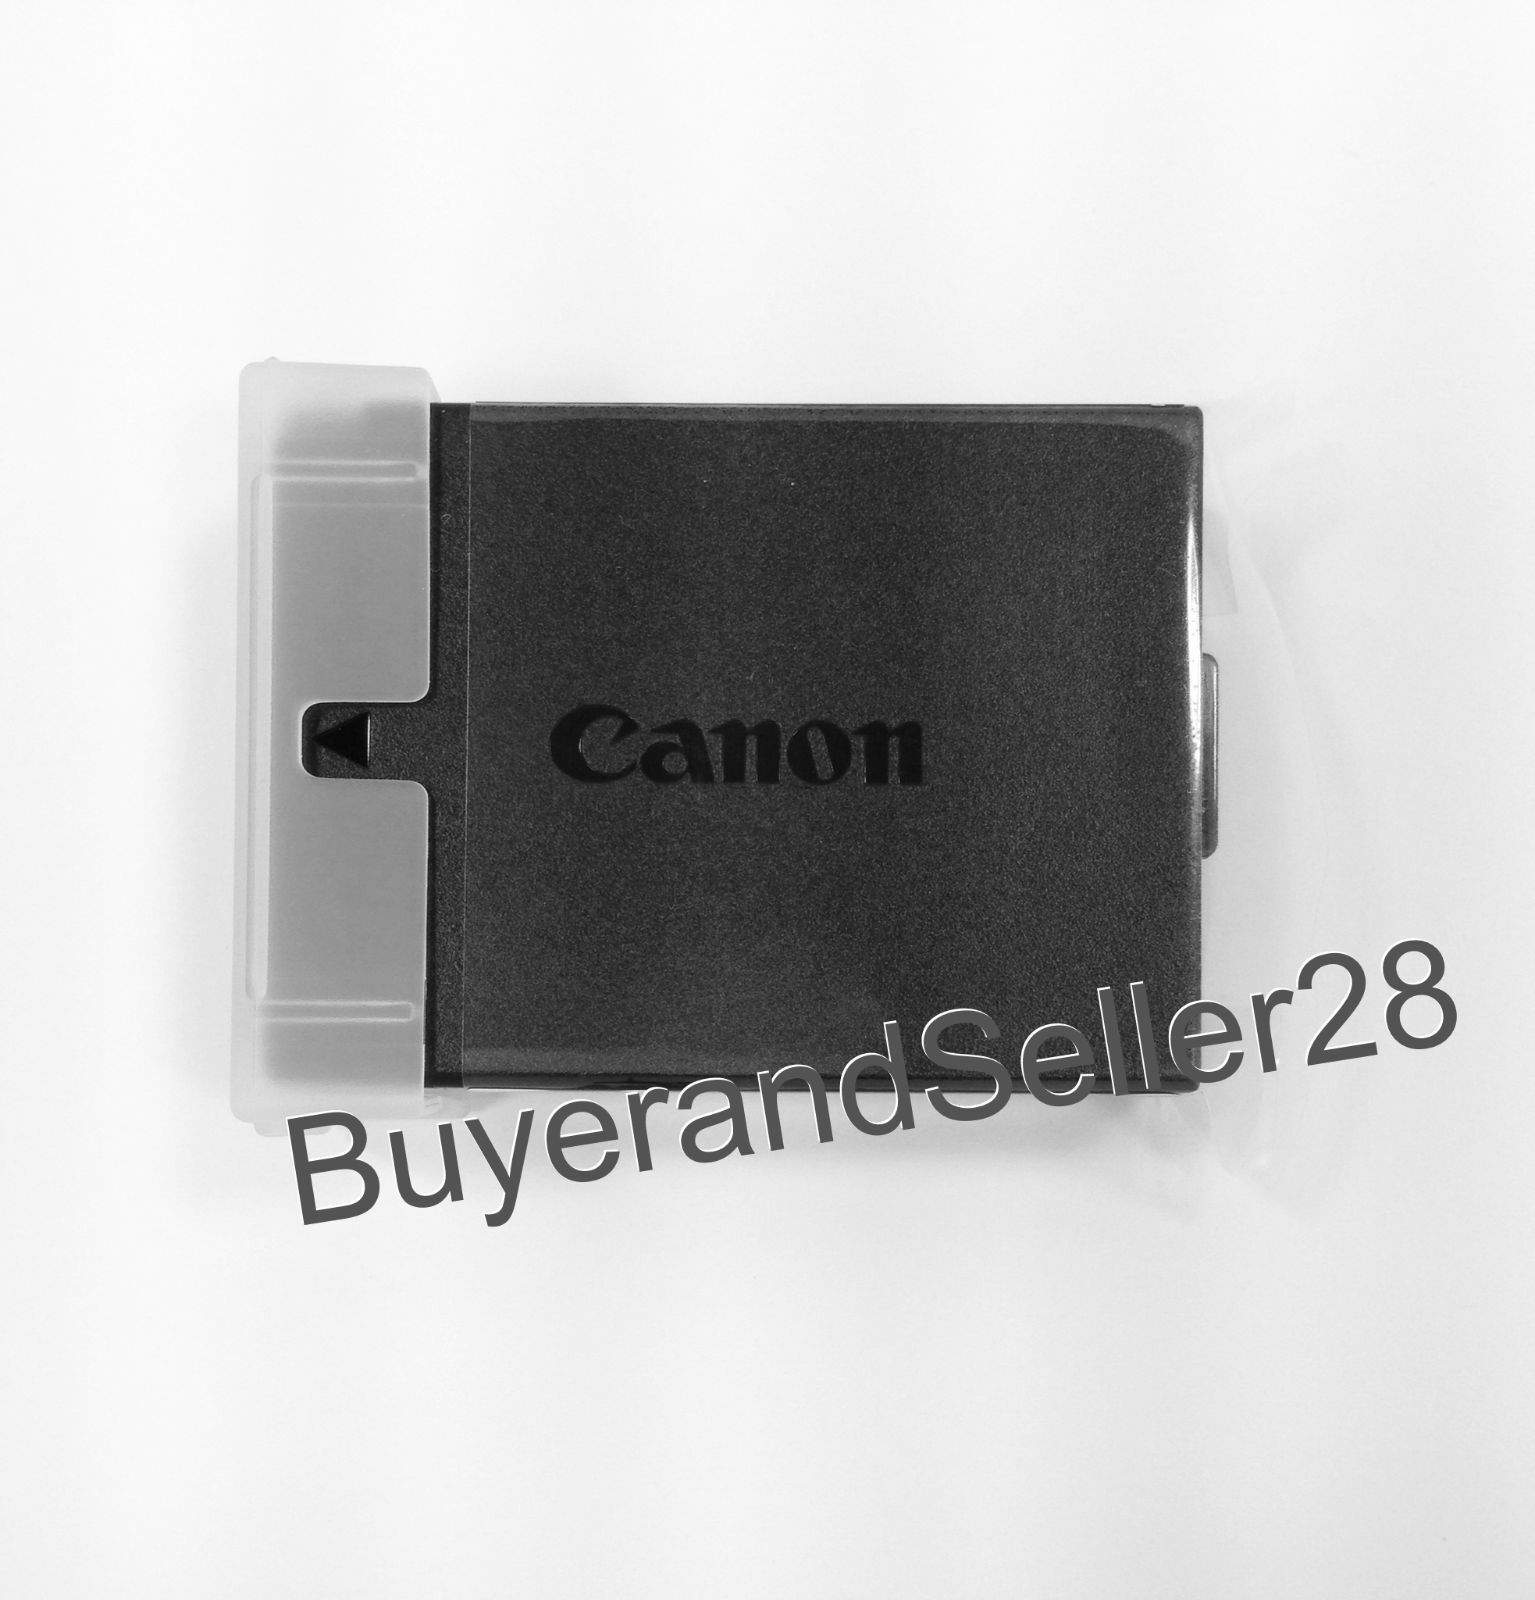 New Genuine Canon Rebel Camera Battery Pack Lp-e10 Fits Only T3/t5/t6/t7